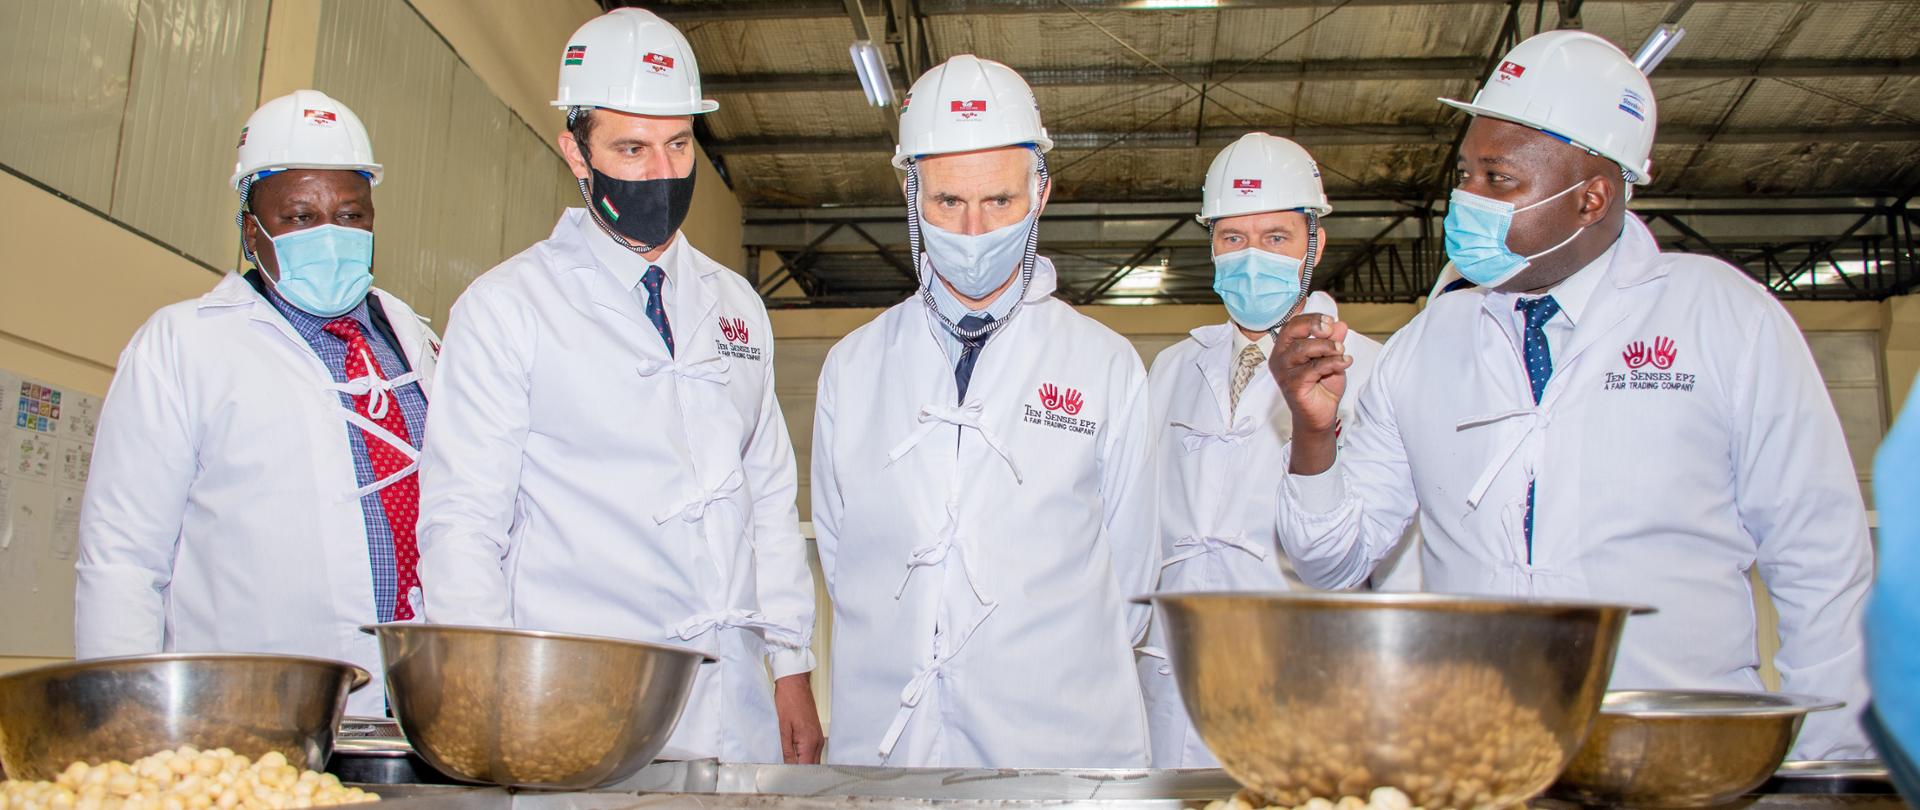 Joint visit of representatives of the Visegrád Group Embassies and the EU Delegation to the macadamia nut factory in Athi River run by the Ten Senses Africa organization (Photos: courtesy of Slovak Aid)